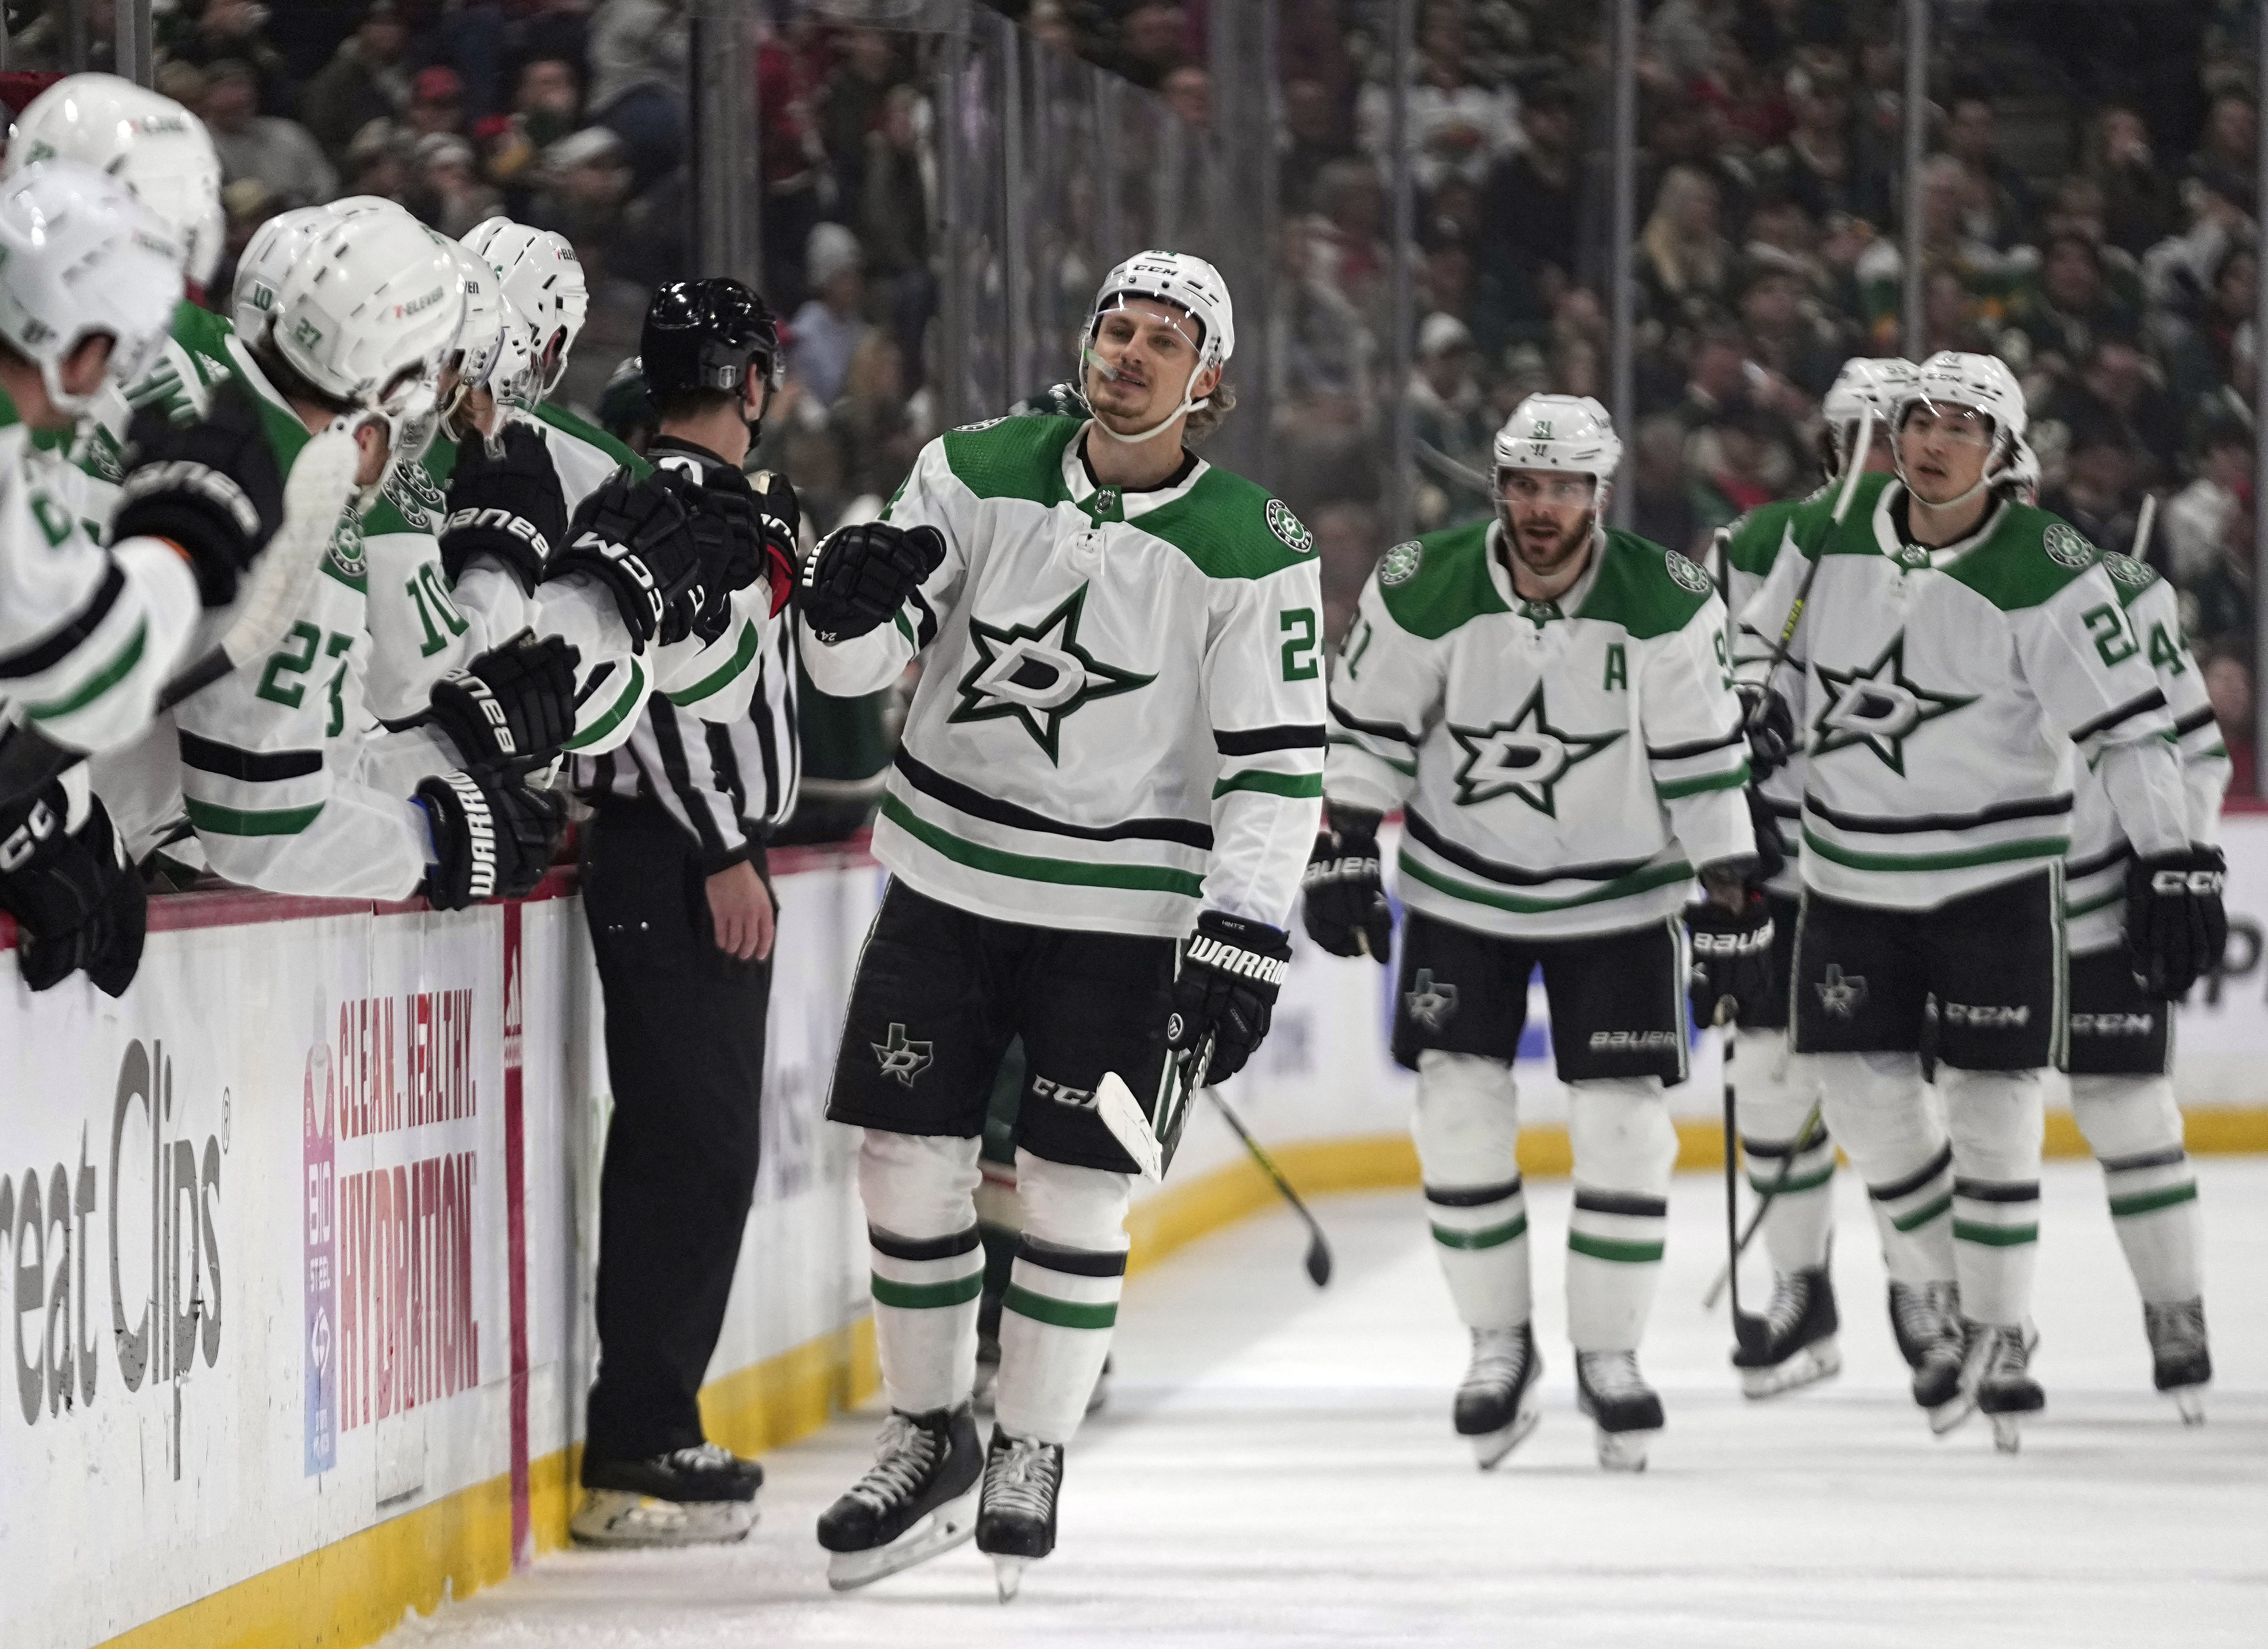 Dallas Stars plan for a full house in Stanley Cup playoffs